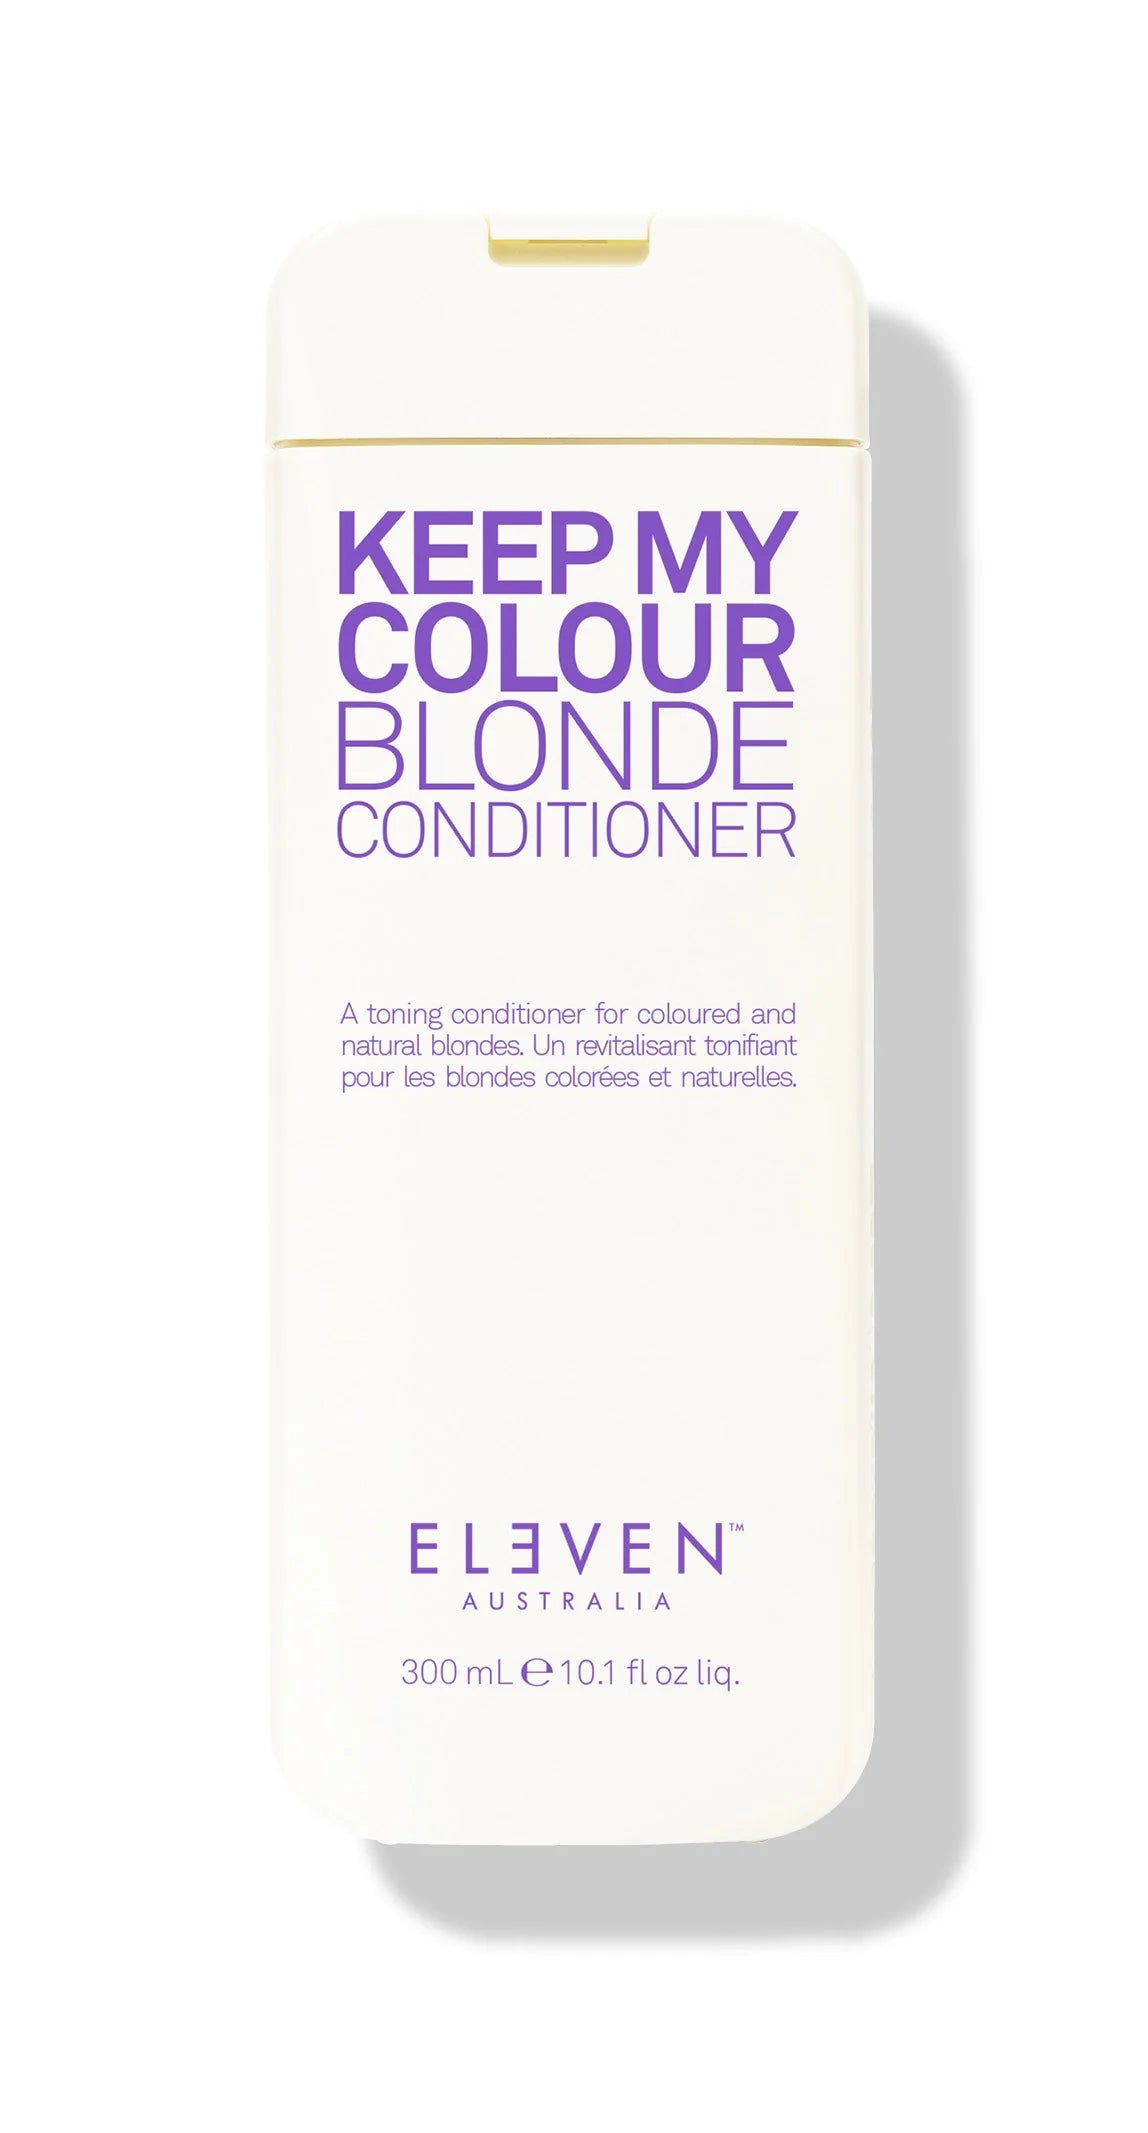 Keep My Colour Blonde Condtioner